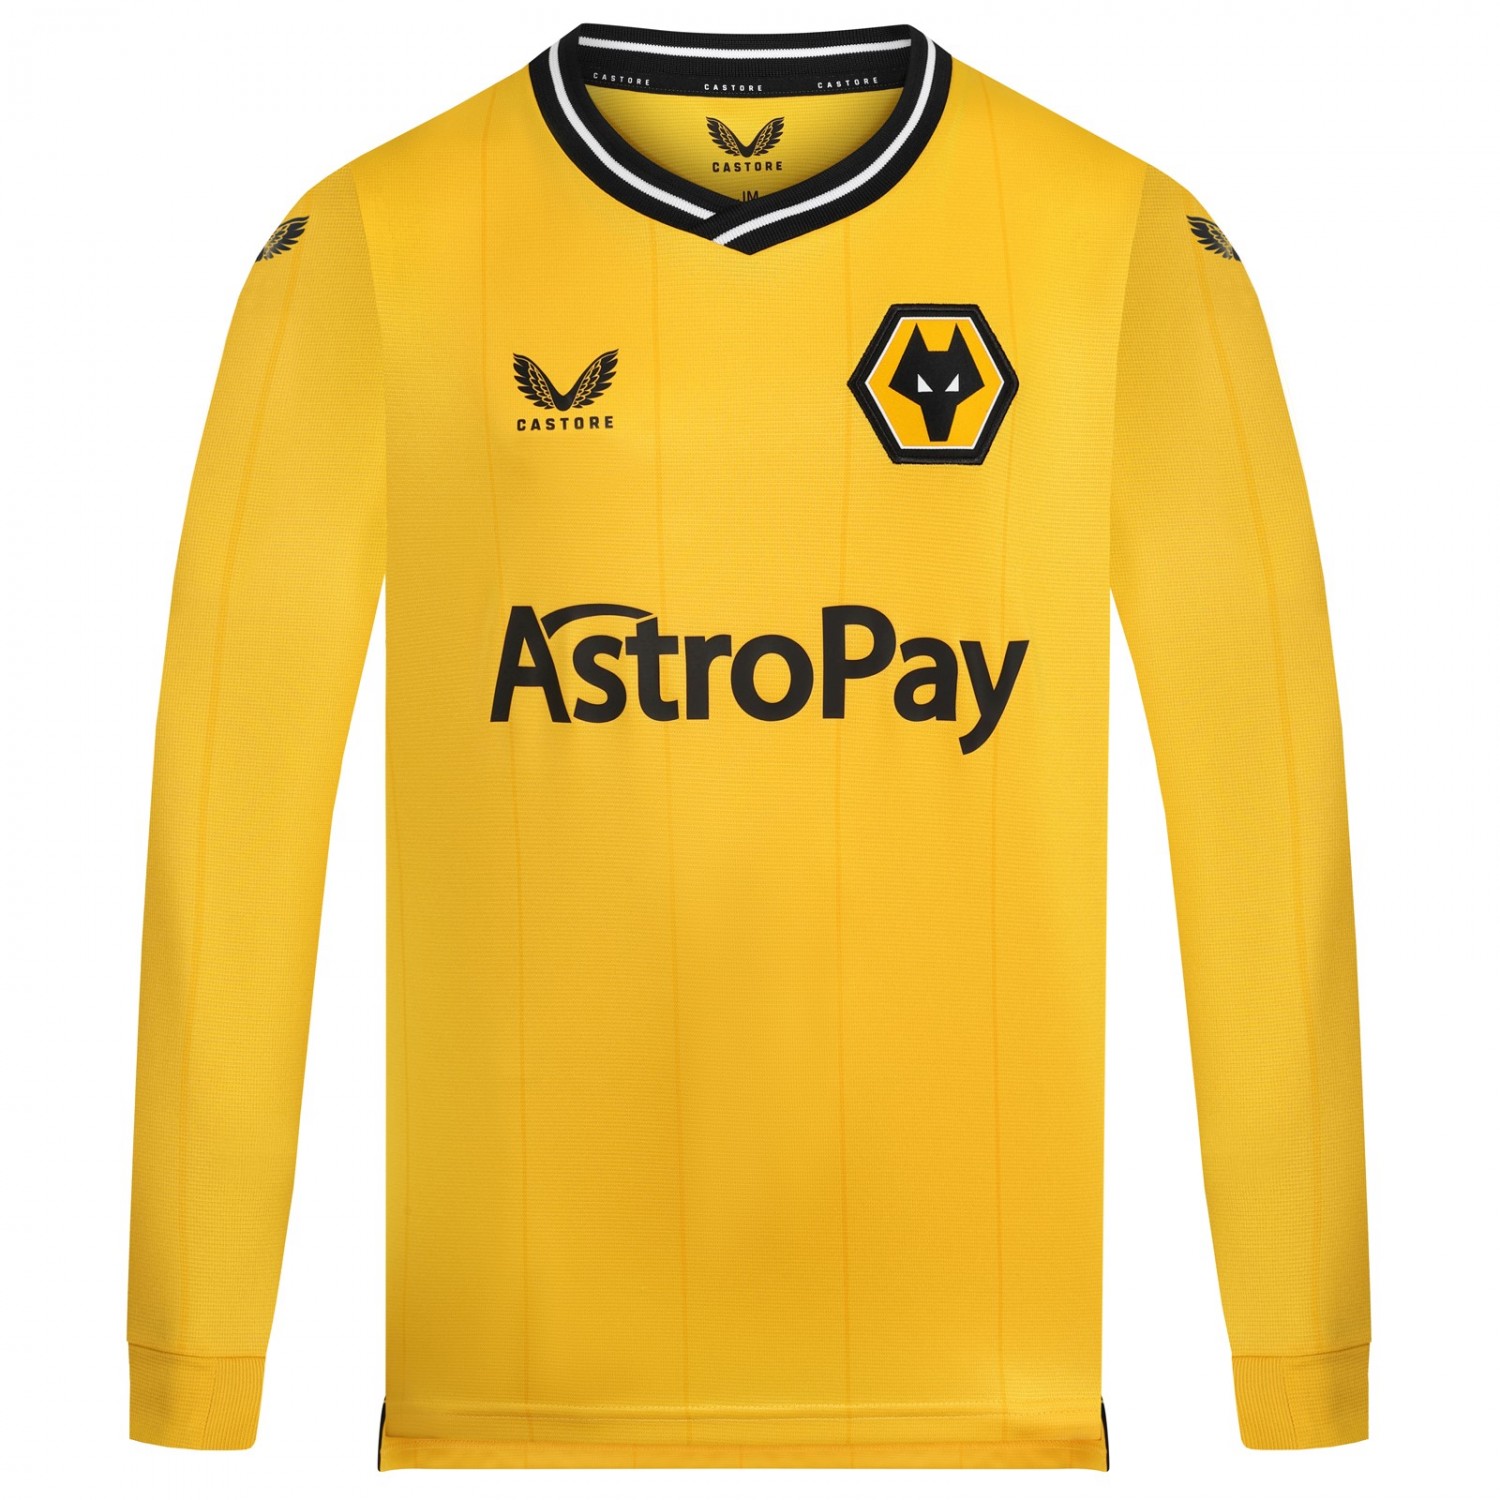 2023-24 wolves home shirt - l/s - junior
this 2023-24 wolves home shirt is a must have for any young fan's wardrobe.
Made from 100% polyester fabric, this long-sleeve shirt is designed for all-day comfort.Featuring the iconic wolves crest and castore logo, this shirt is an excellent way for young supporters to show off their team pride.
the design for this shirt has been carefully crafted combining classic elements of the club's history with modern design features. 
this wolves home shirt is available in sizes to fit junior fans of all ages, and the long sleeves make it perfect for cooler weather. 
it is designed to be worn both at home and on match days in the stadium, making it a versatile and essential part of any young wolves fans' wardrobe.
and